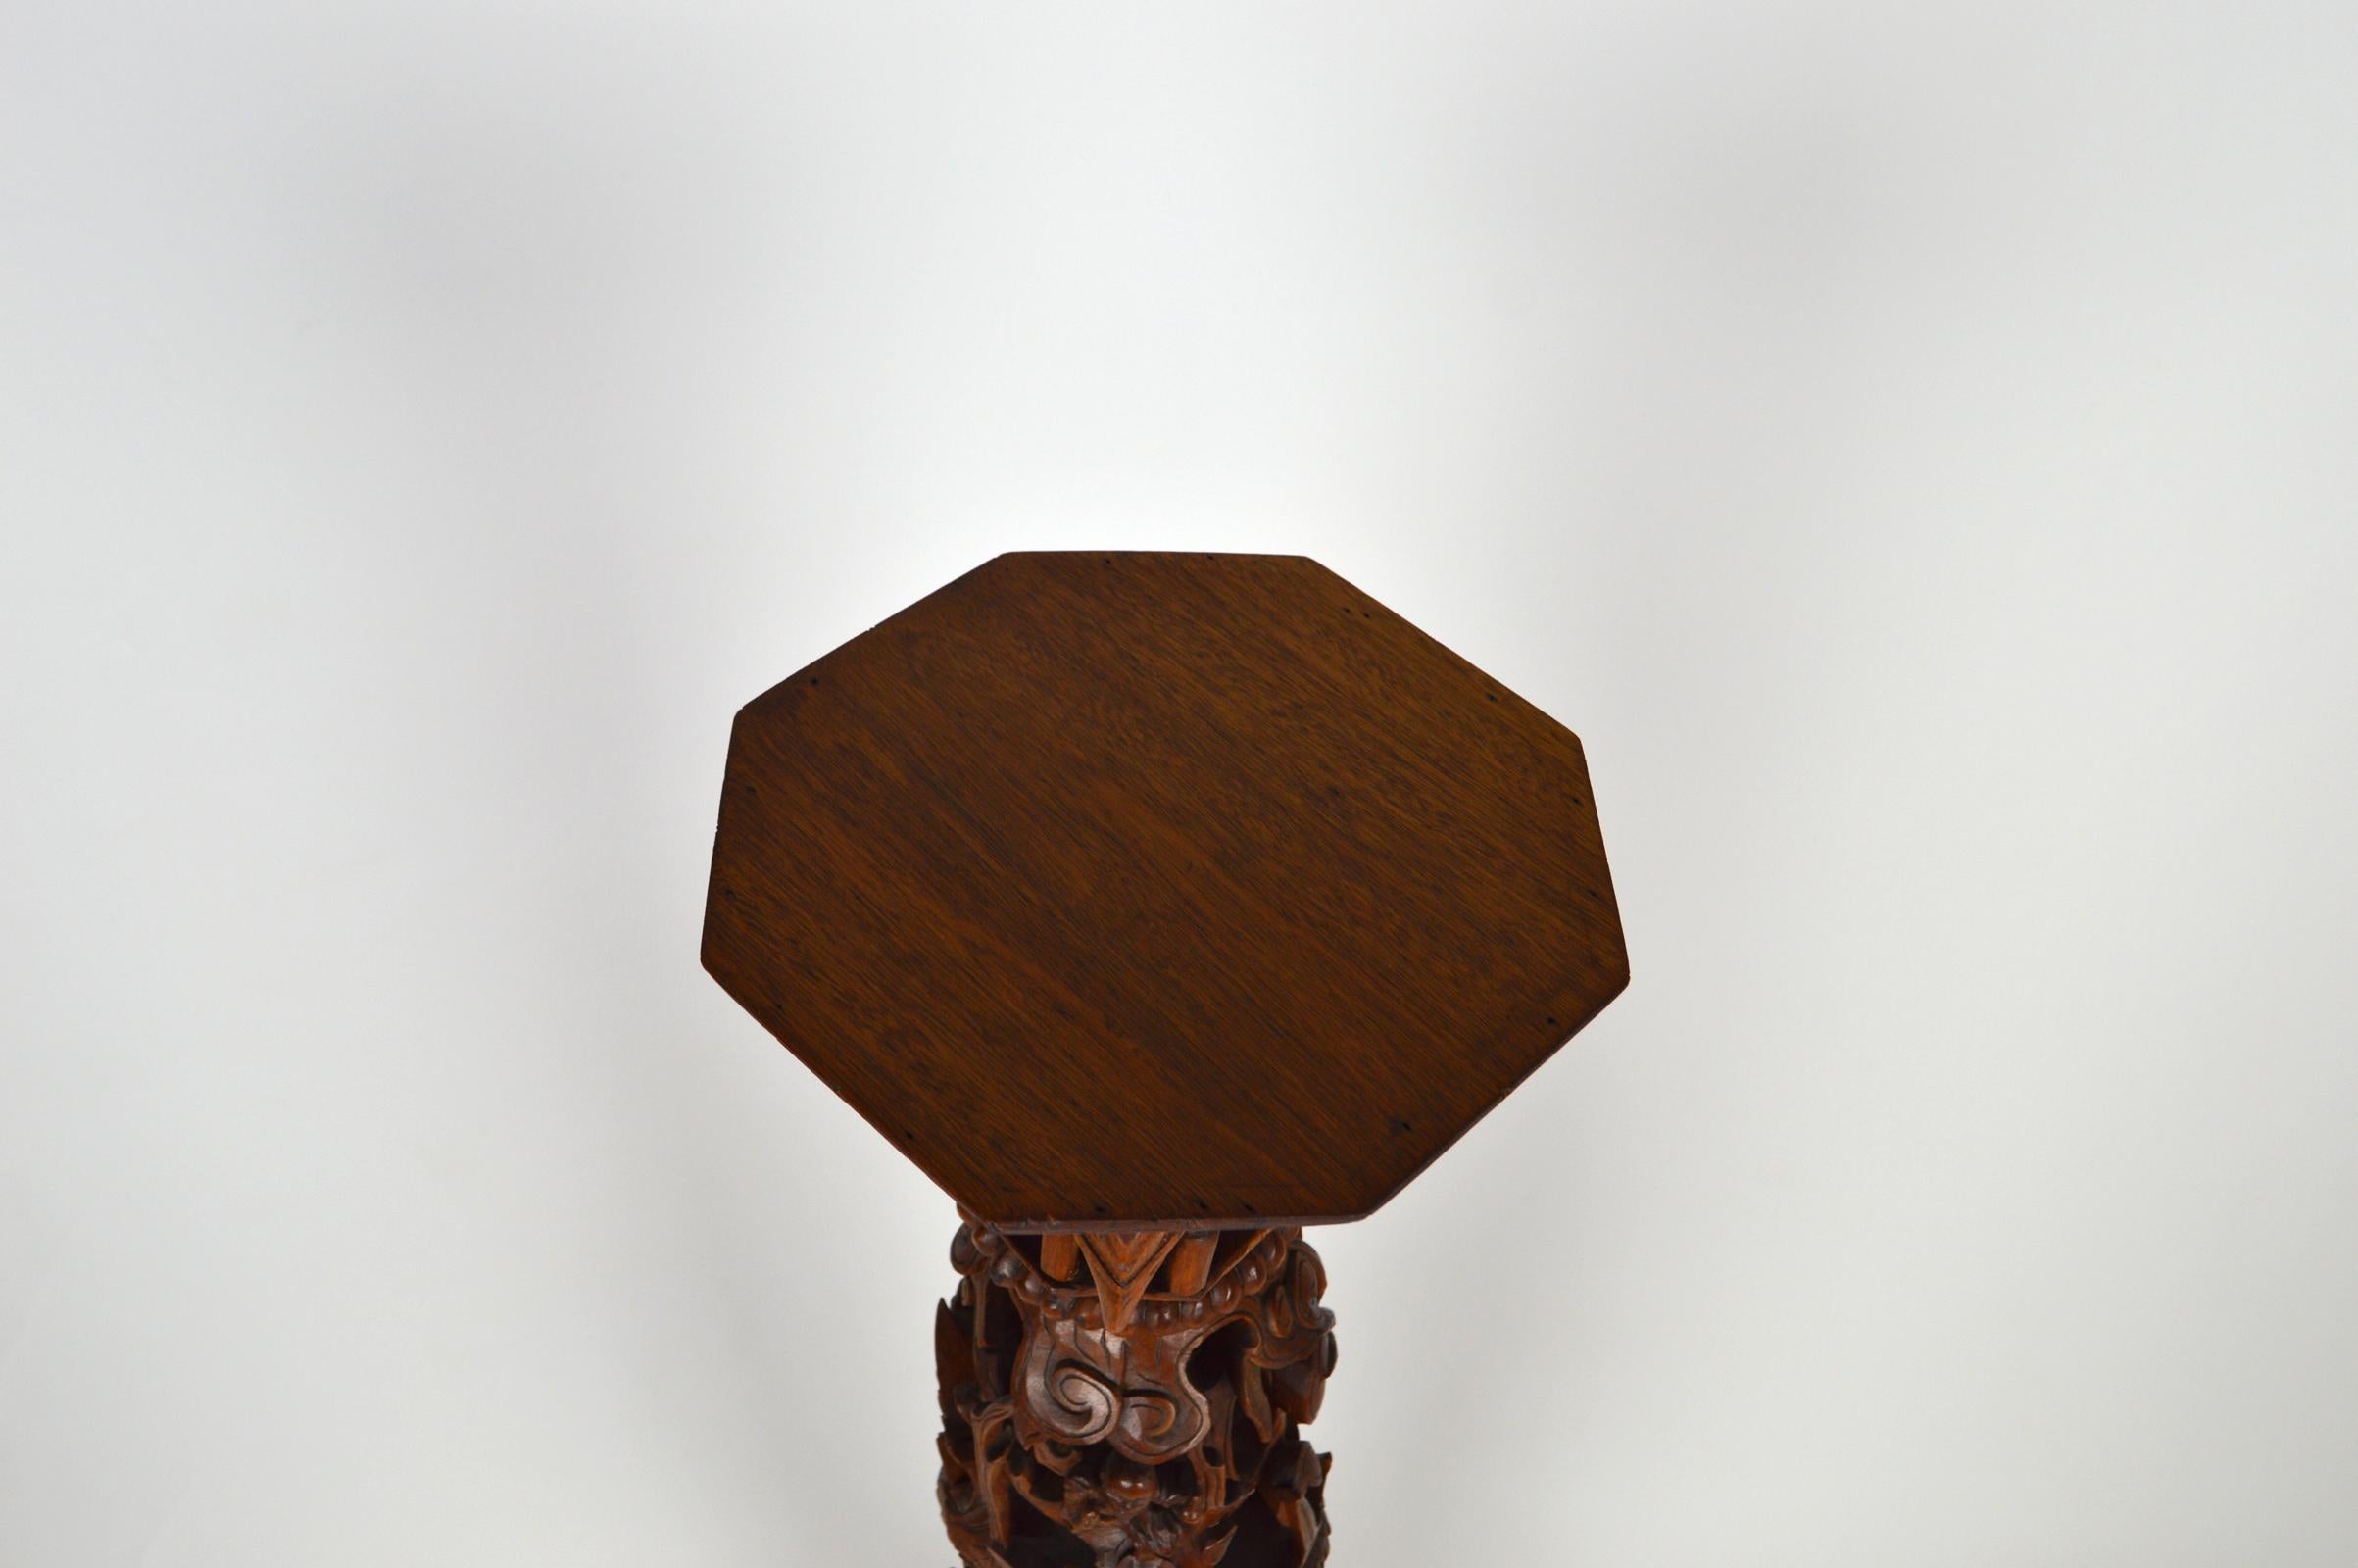 Indochinese Pedestal Table / Pot Stand in Carved Wood, Mythological Theme, 1890s For Sale 14